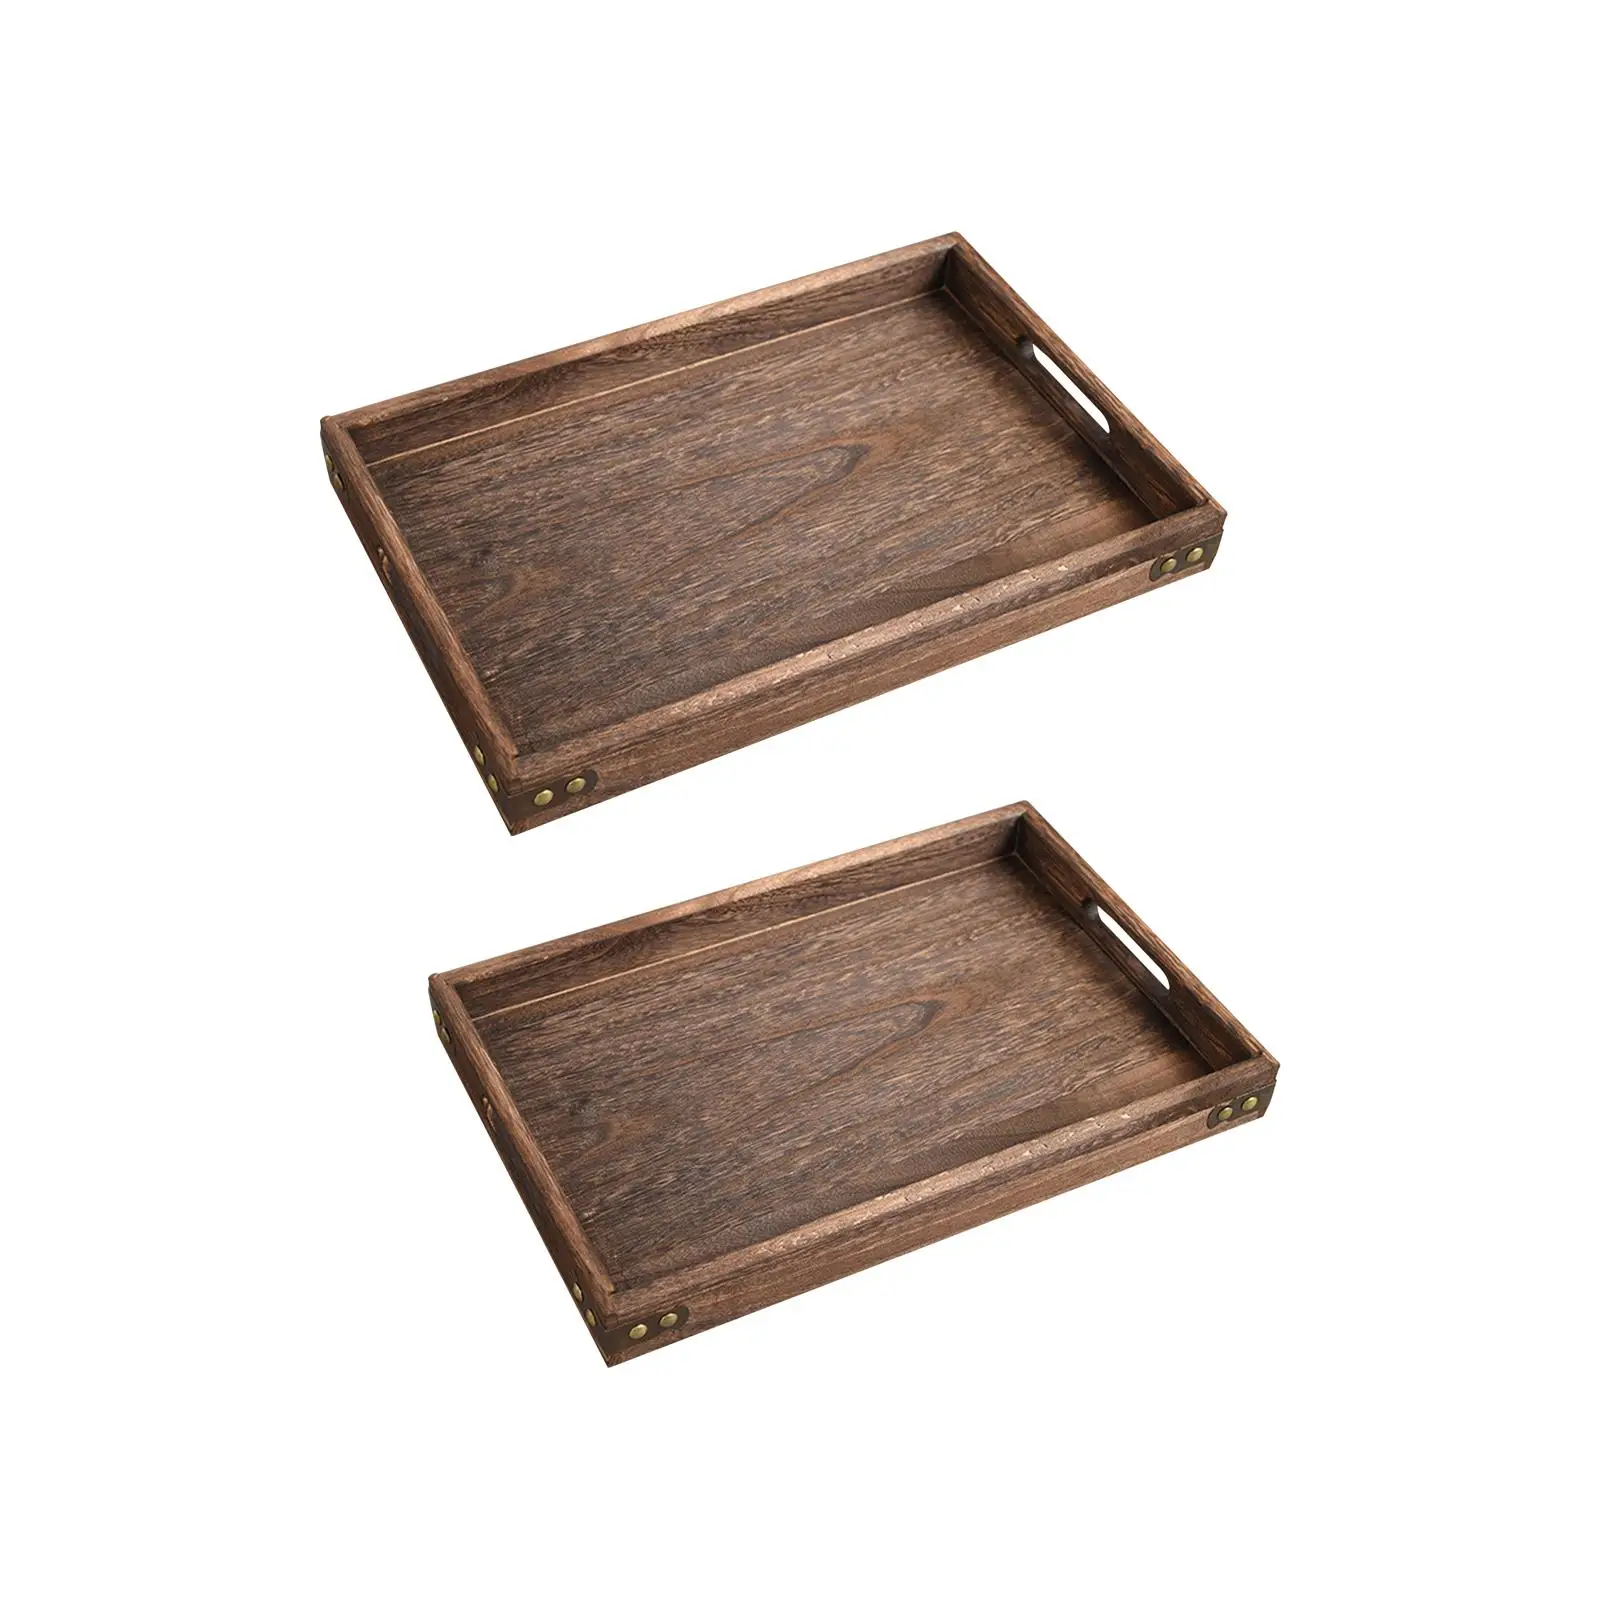 Rustic Wood Serving Tray Platter Food Trays Convenient Lightweight for Breakfast Sofa Couch Tray Rectangular Multipurpose